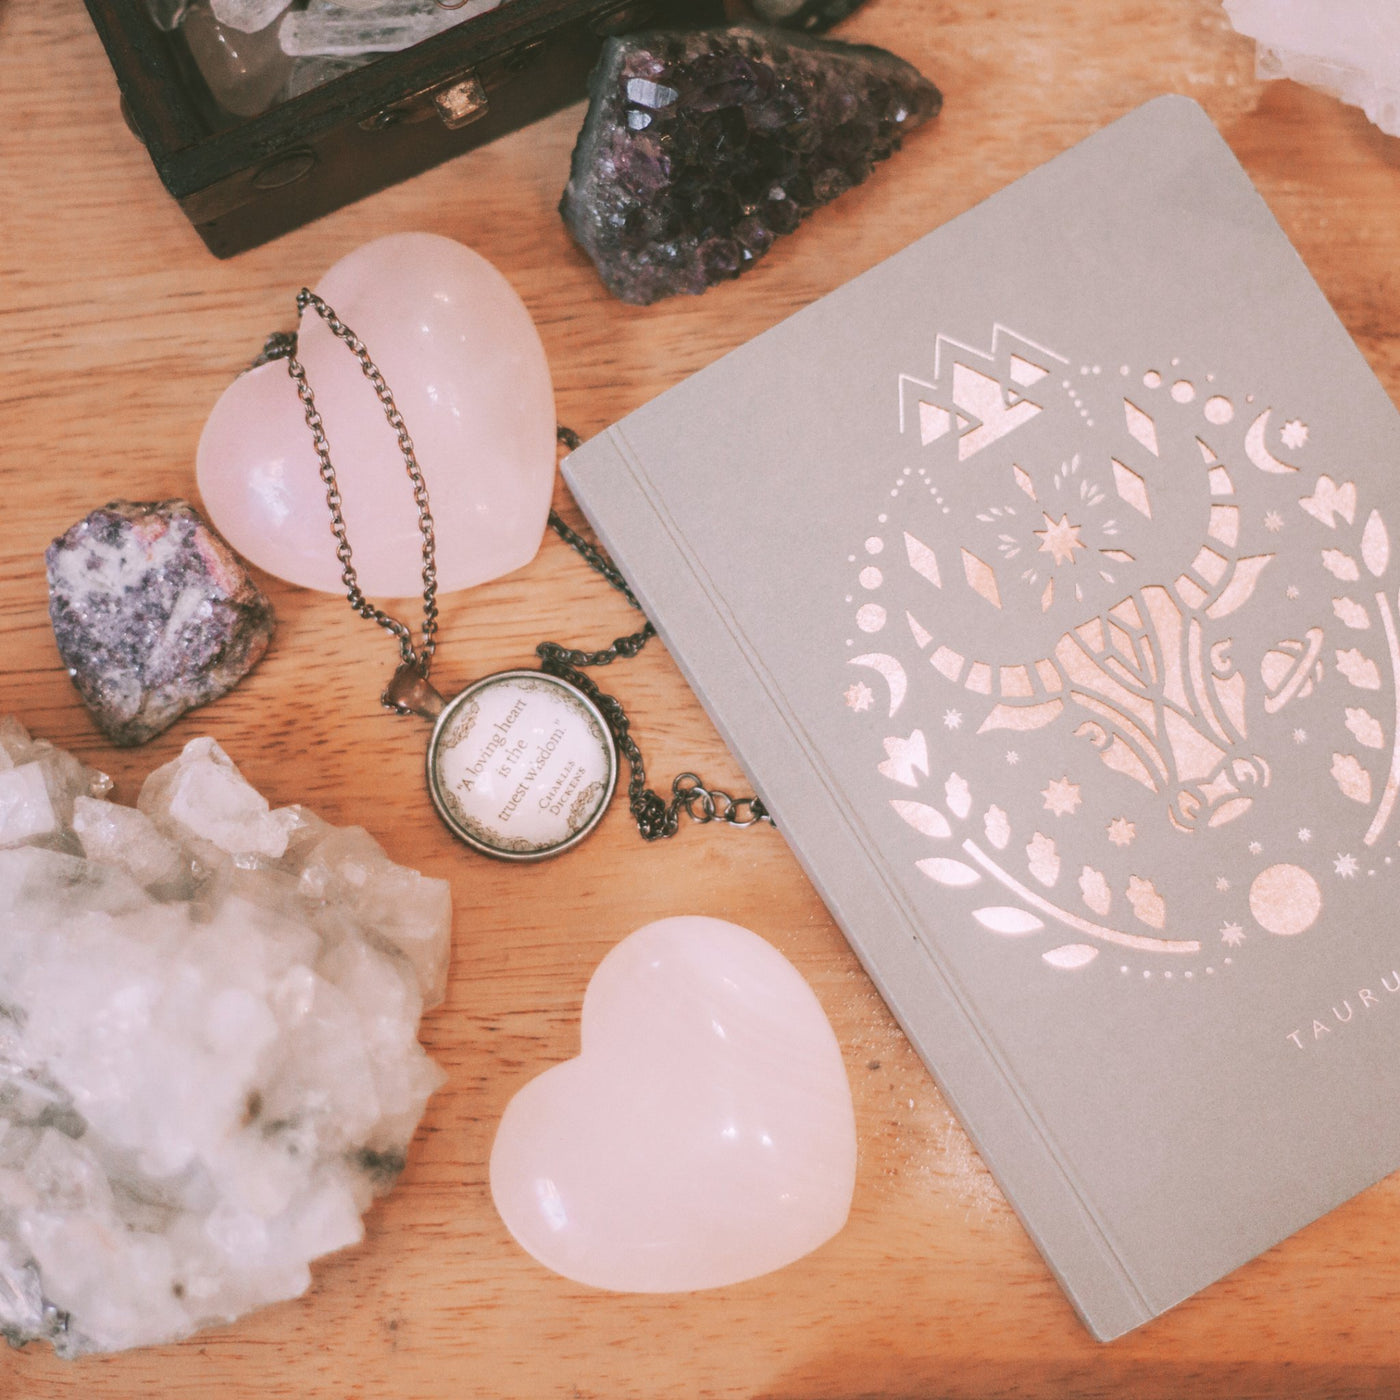 Healing Your Spirit with Love: A Unique Valentine's Day Perspective - Moon Charged Crystals